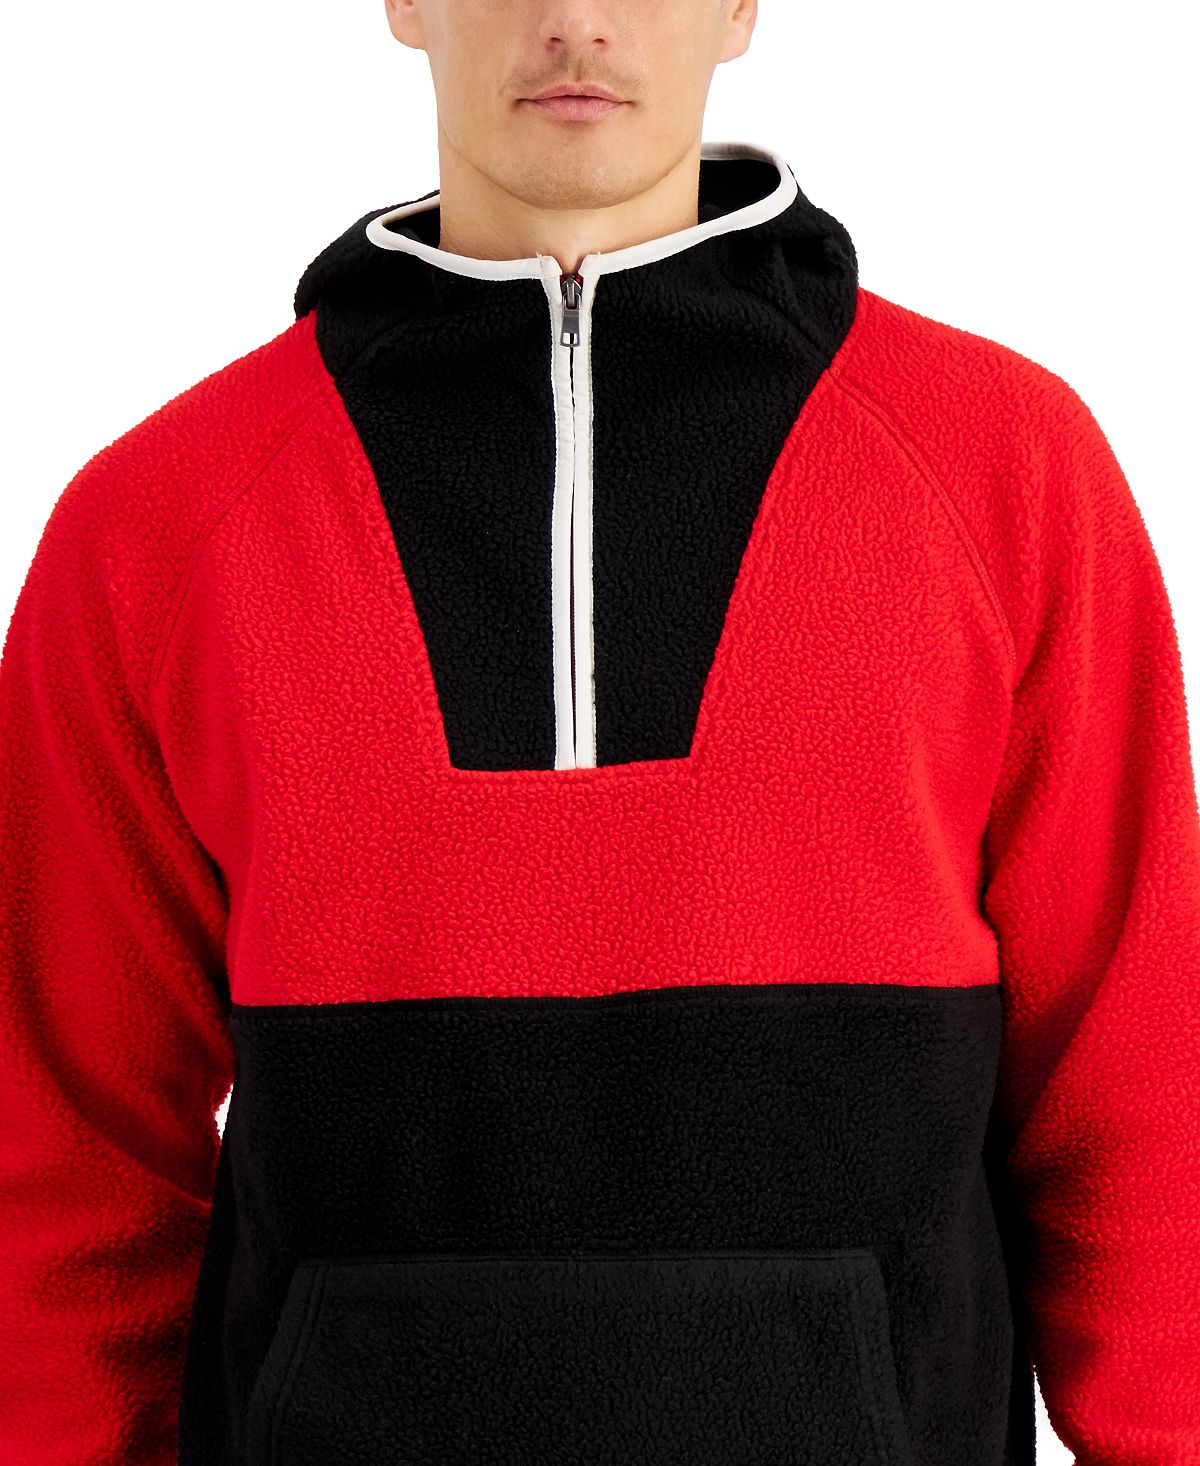 Club Room Colorblocked Anorak Sweater Ablaze Red Combo